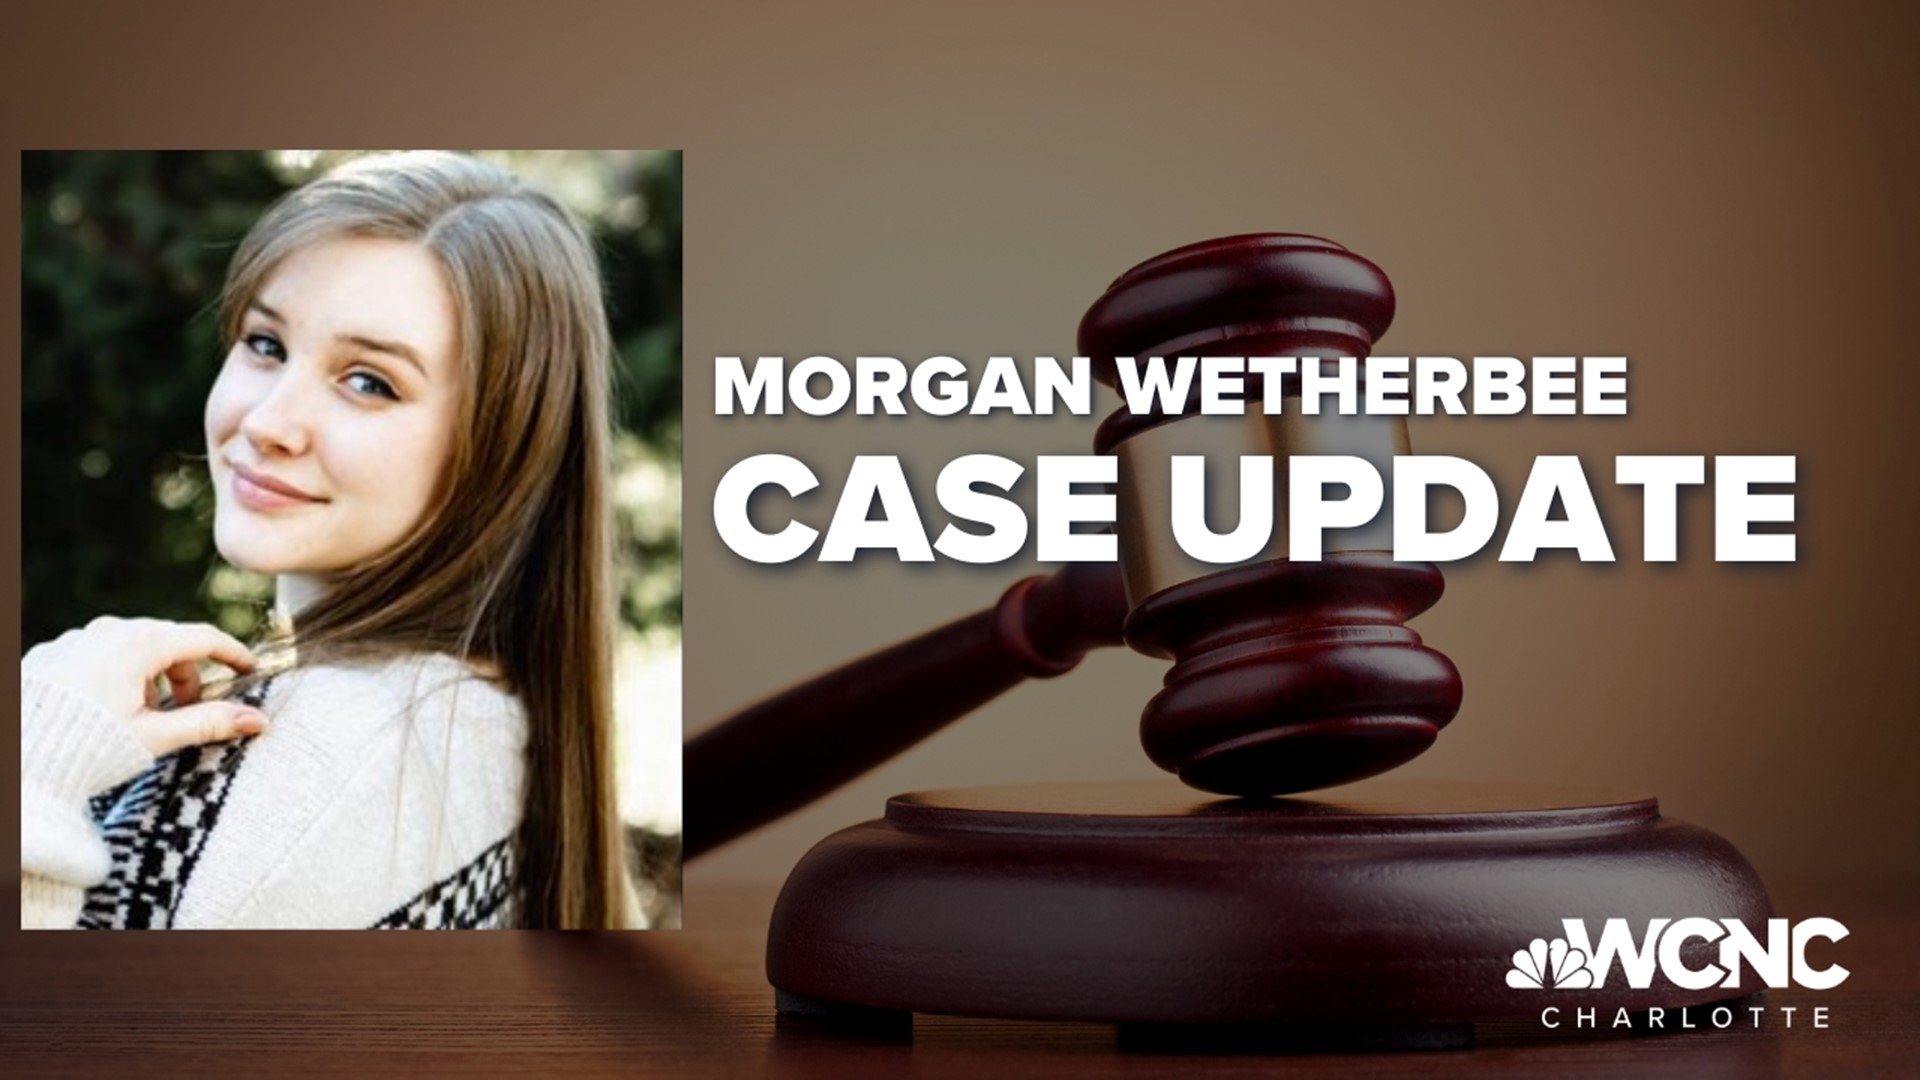 Chloe Leshner breaks down how Morgan Whetherbee's loved ones reacted to the decision.